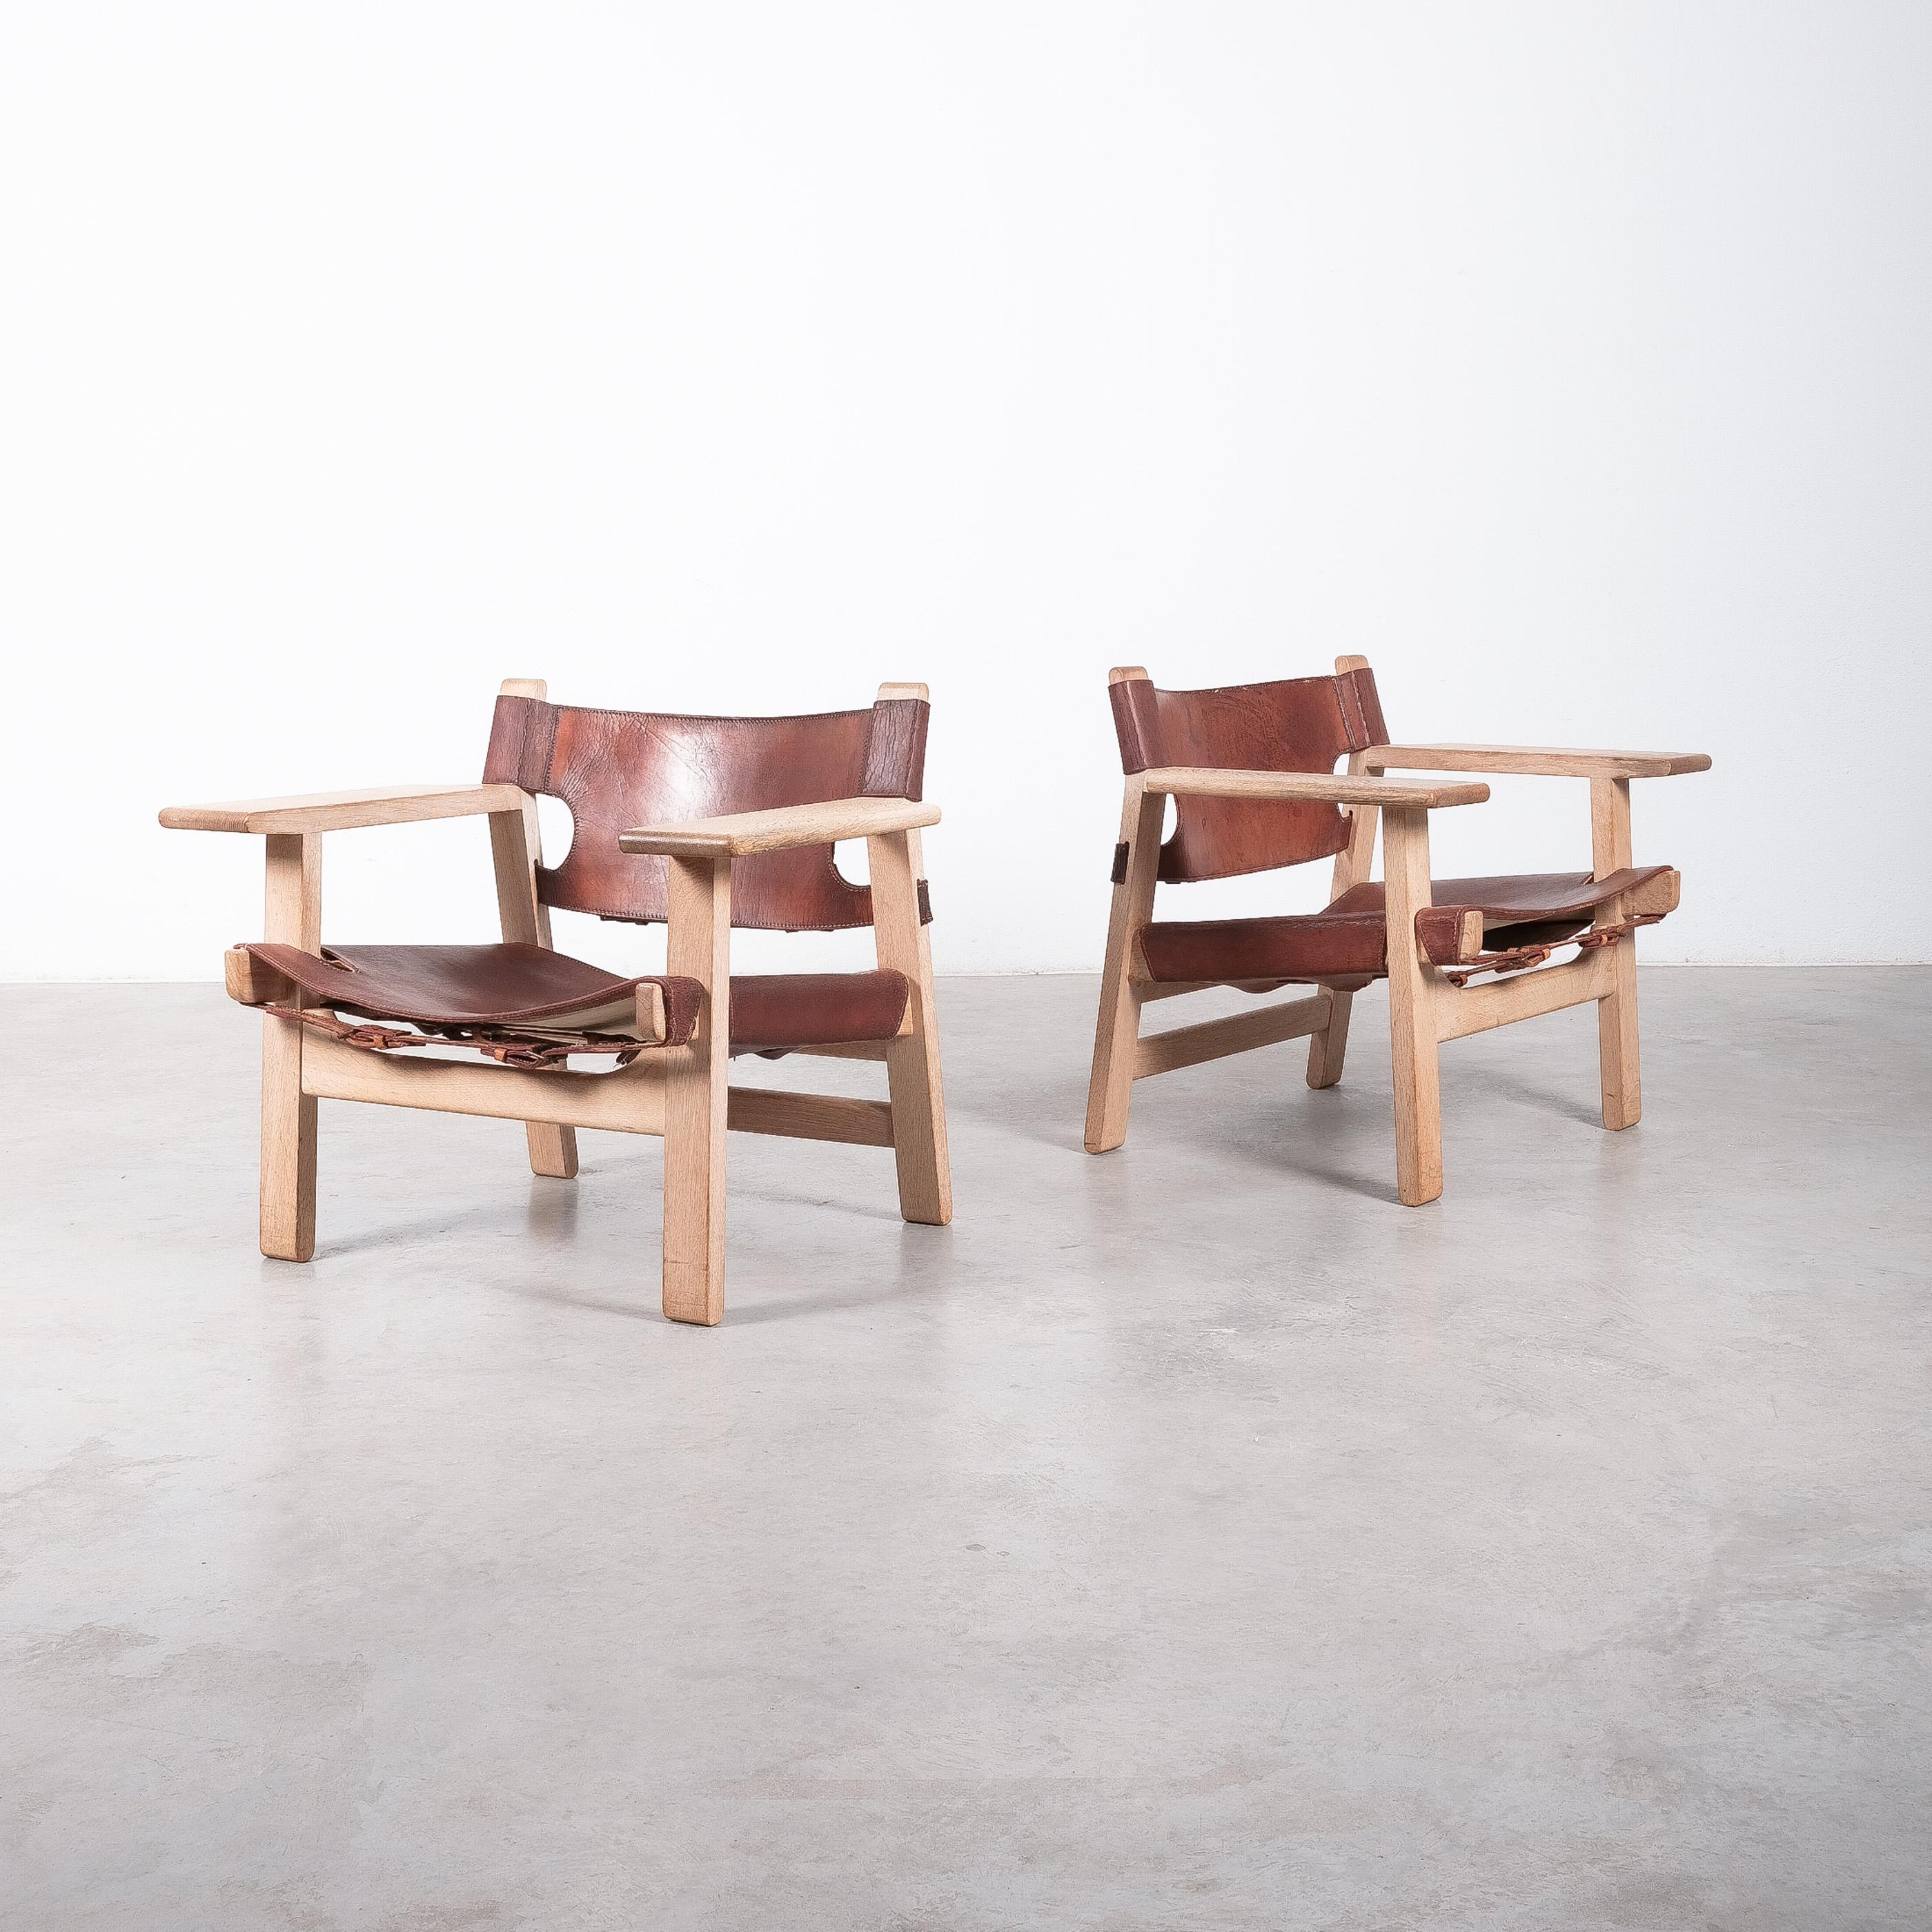 Pair of vintage Spanish chairs with original leather by Børge Mogensen, Denmark, Fredericia Stolefabrik, labelled, midcentury.

A pair of labelled Børge Mogensen 's iconic armchairs in solid oak and its original restored leather. The seat and back